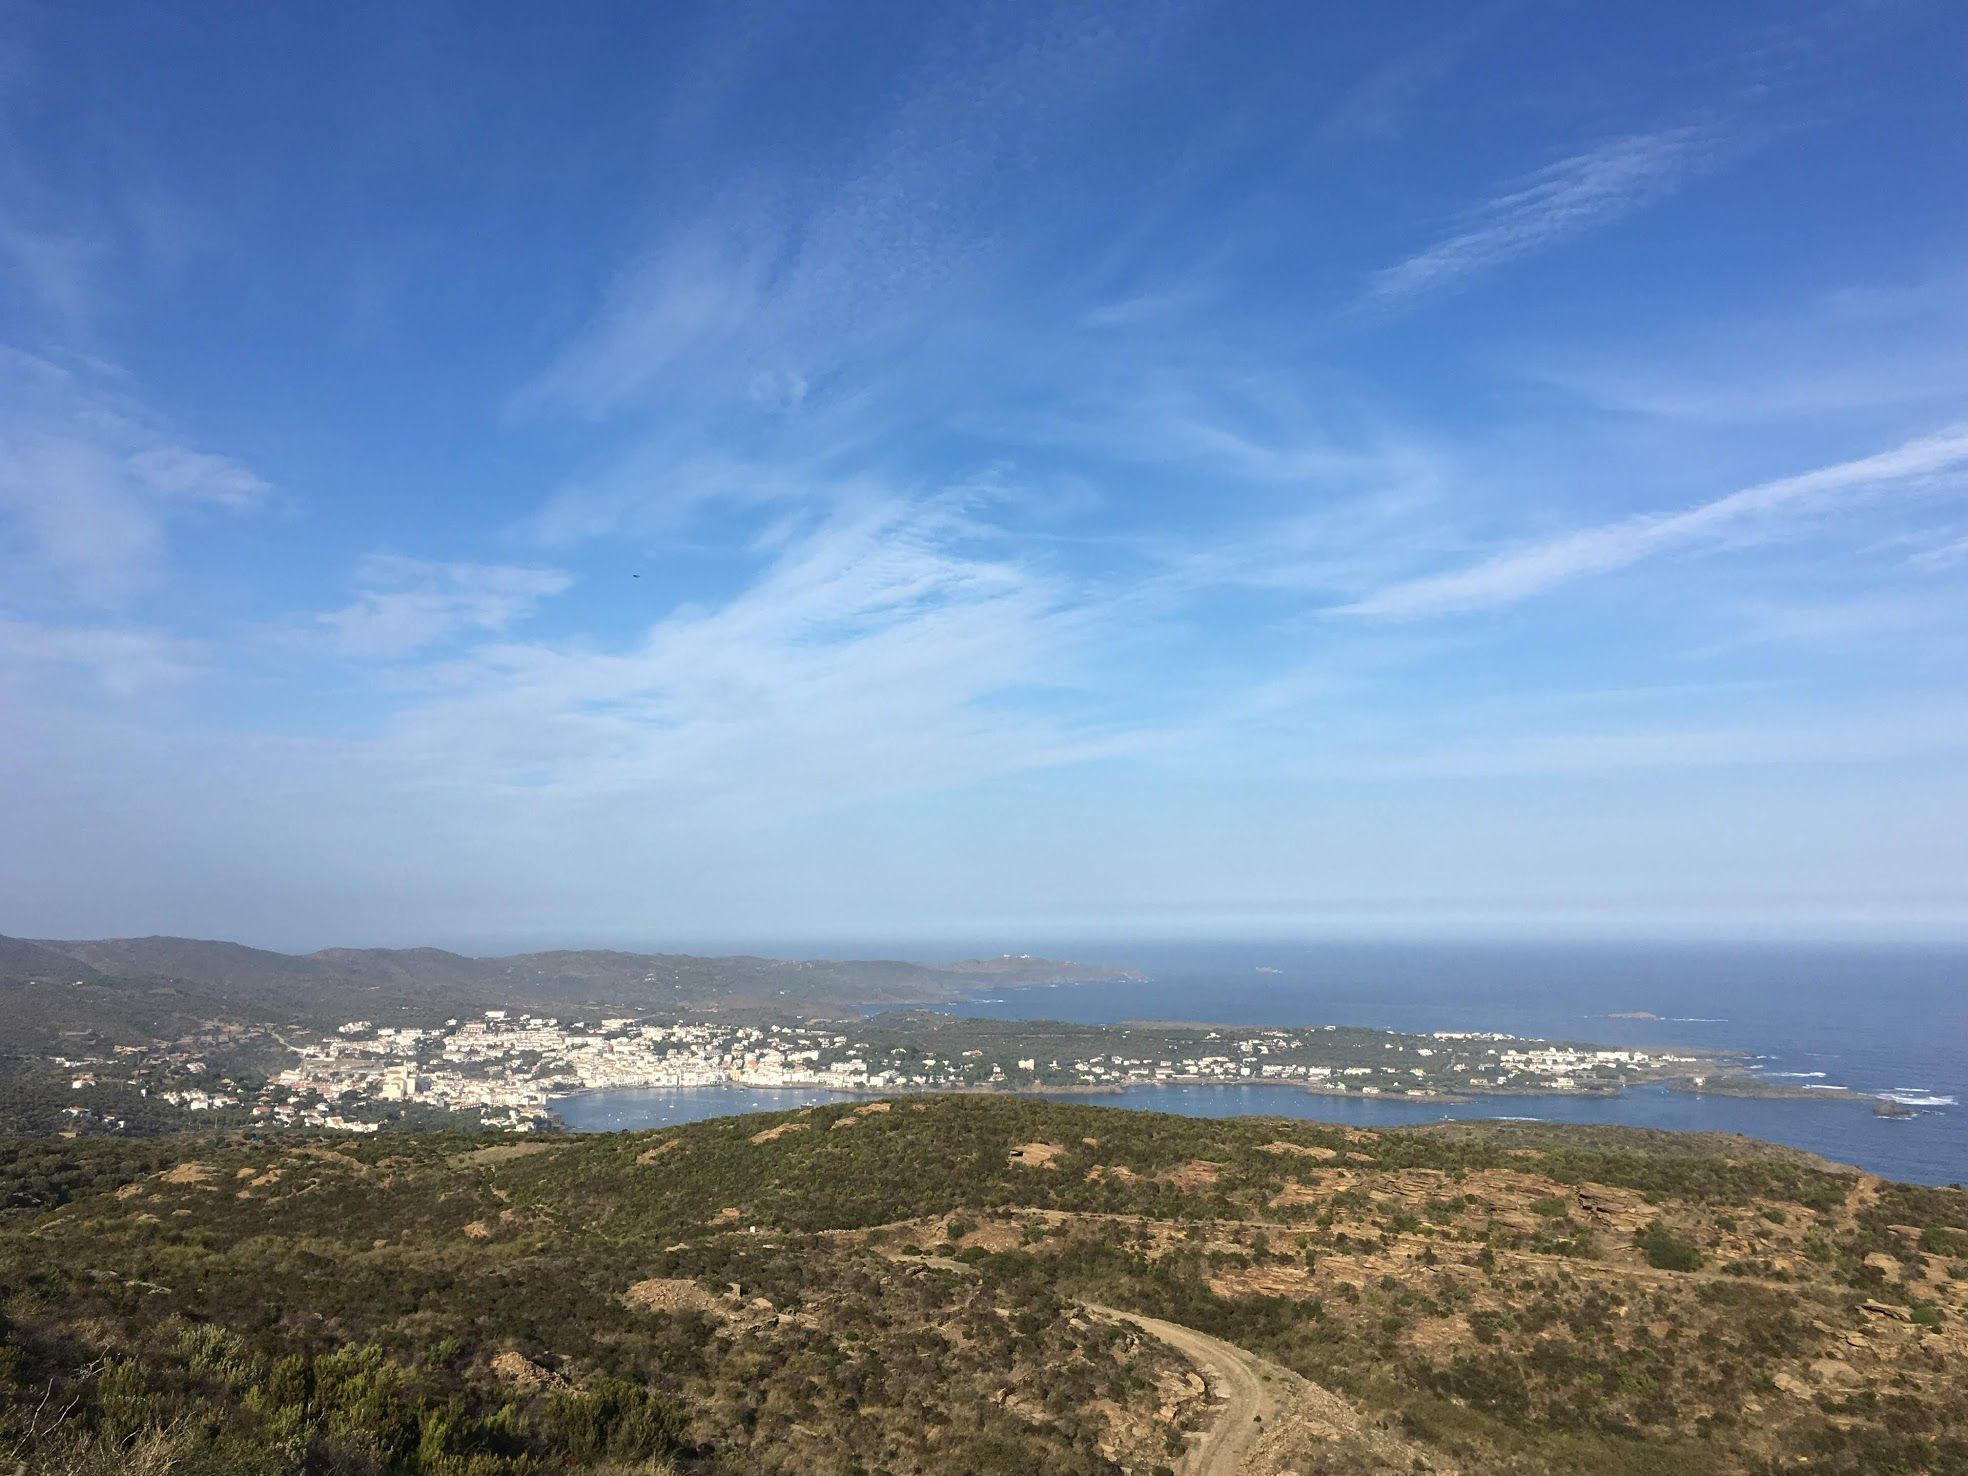 View of Cadaques from the hike